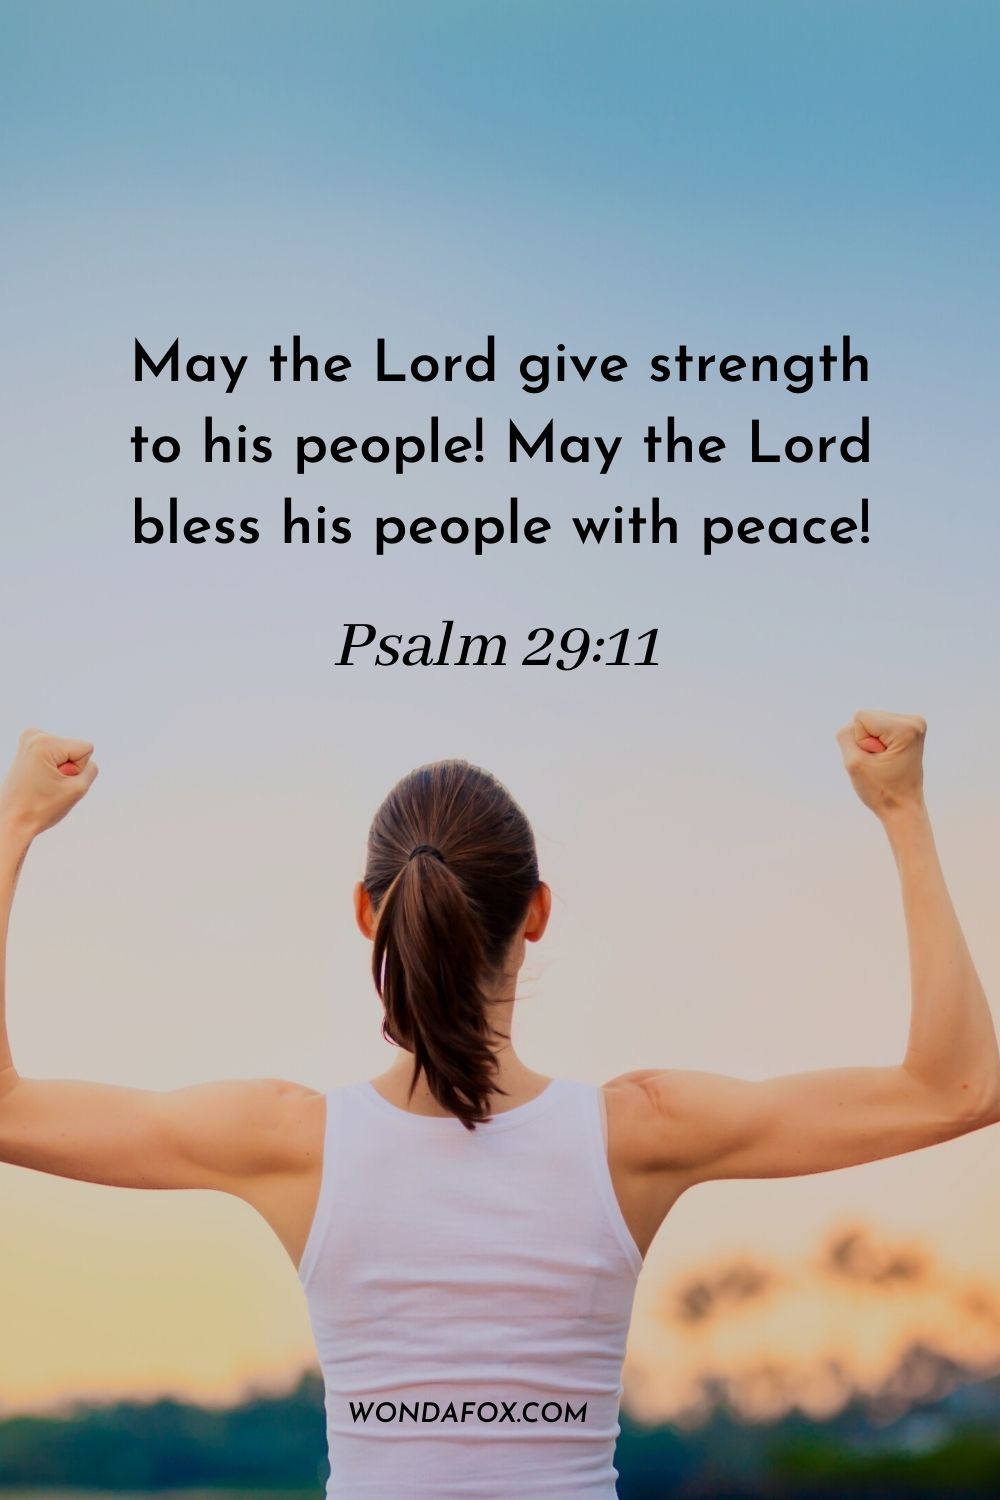 May the Lord give strength to his people! May the Lord bless his people with peace! Psalm 29:11